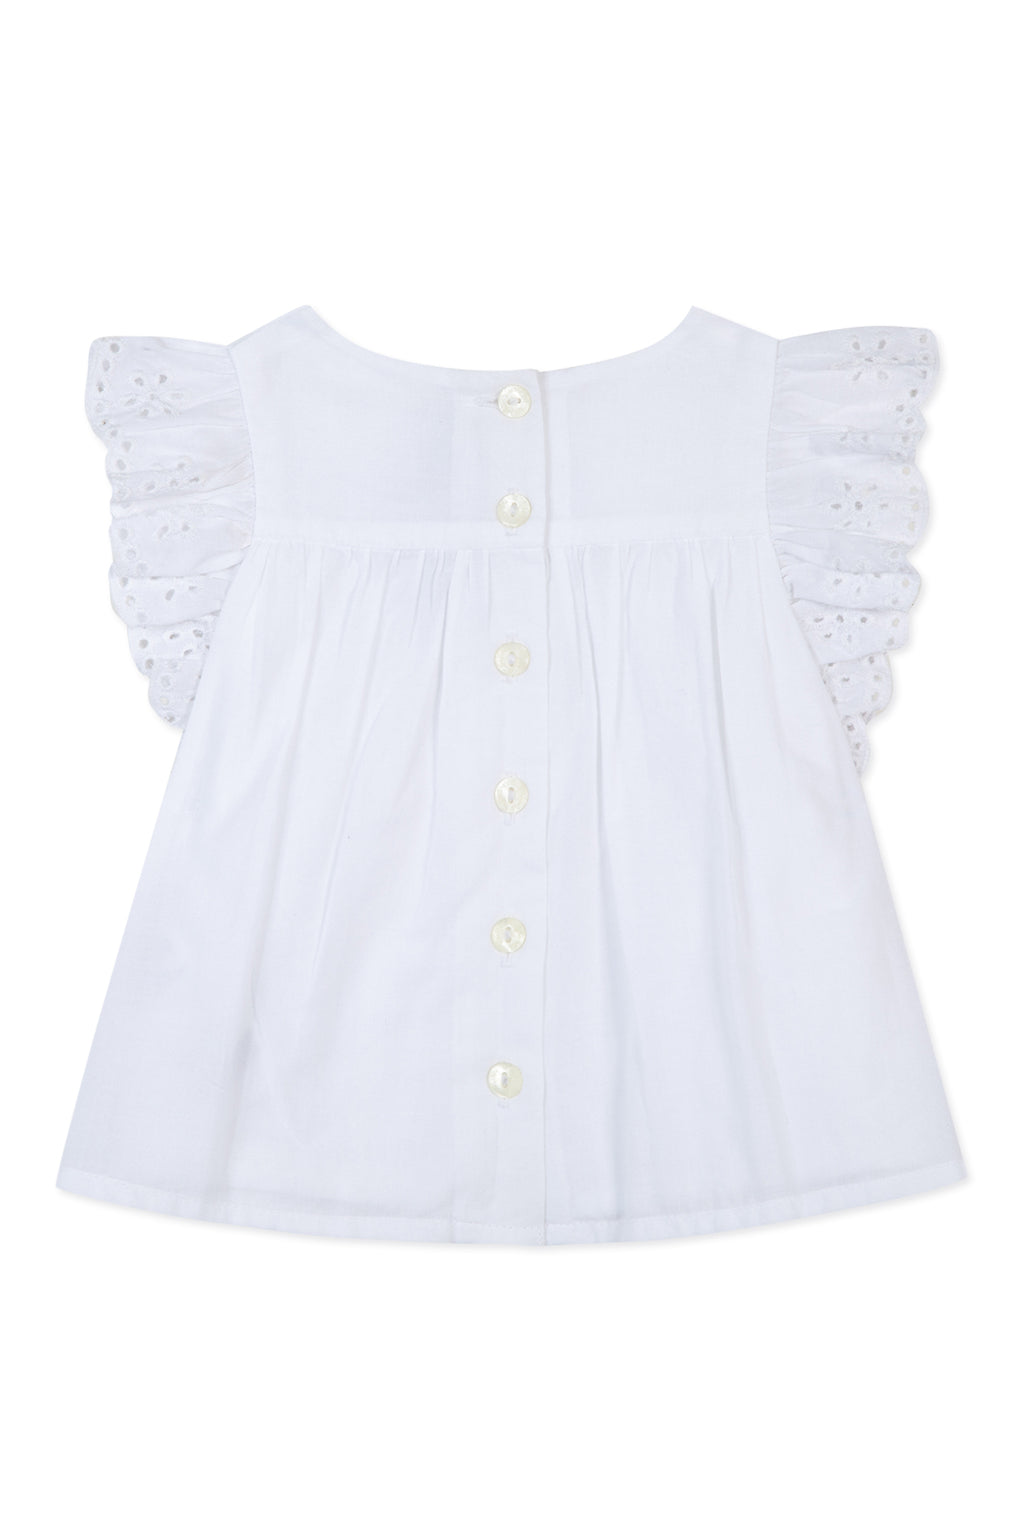 Blouse - Blanc broderies anglaises